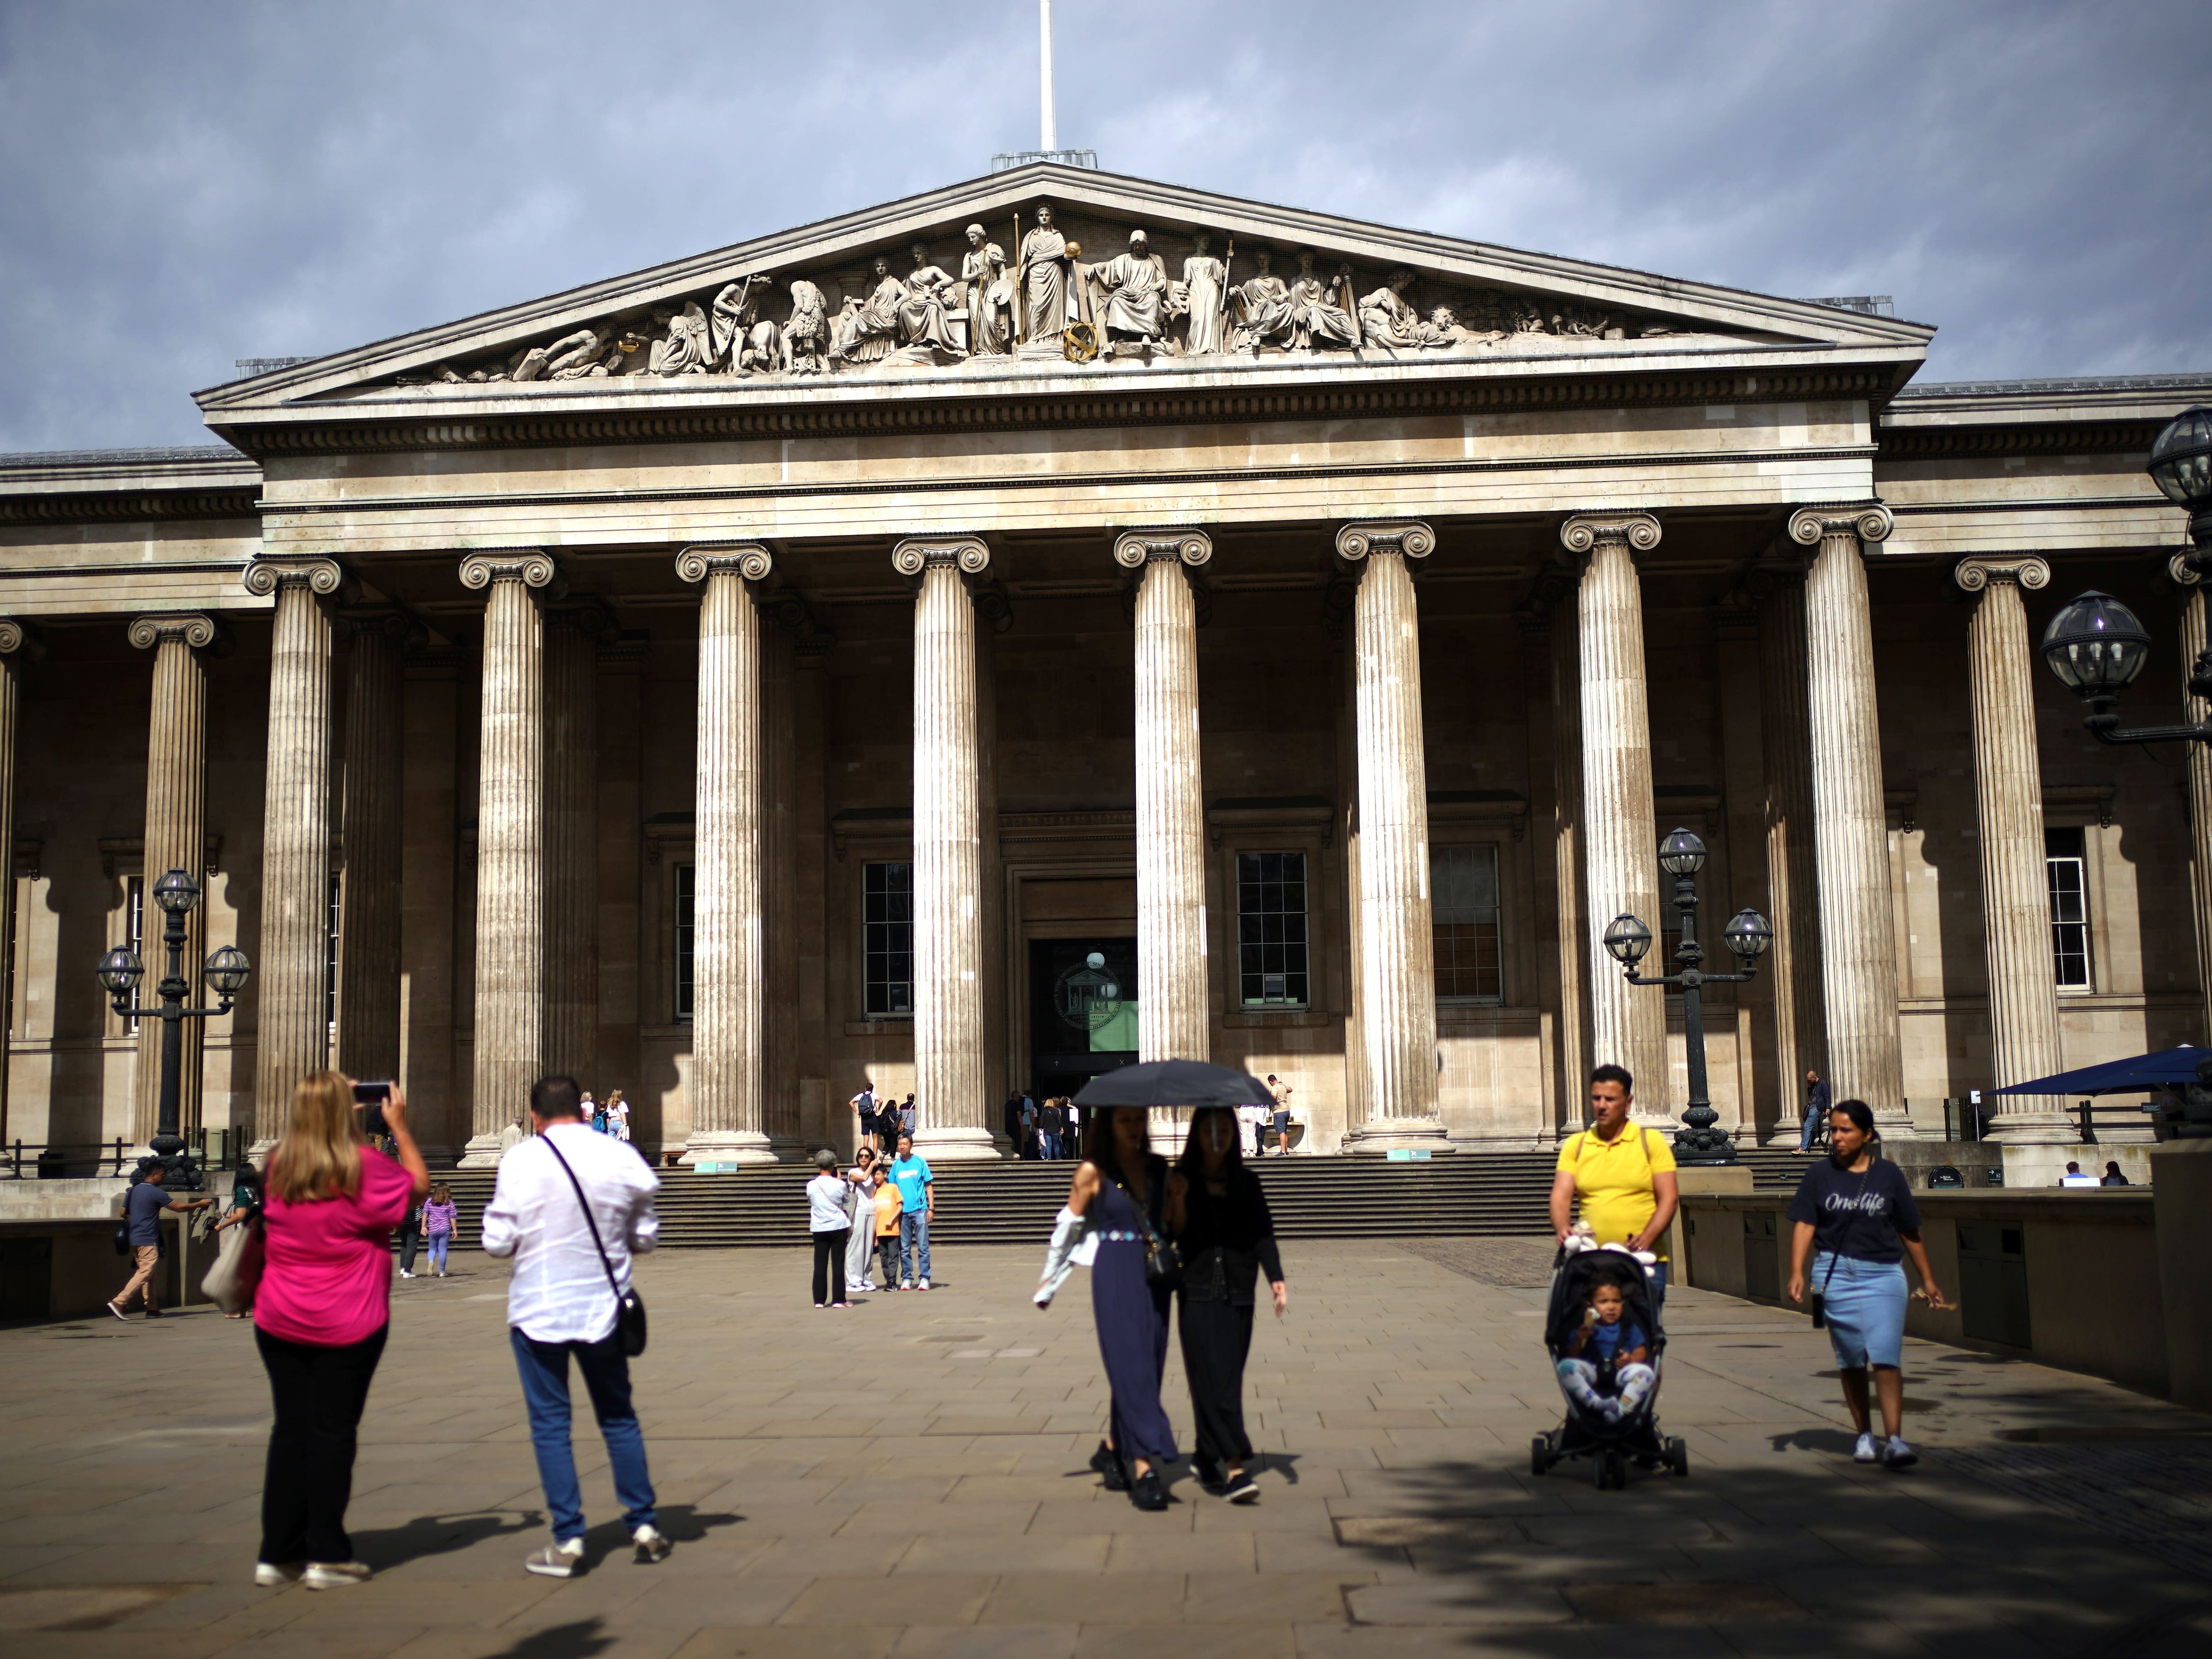 Antiquities dealer was ‘absolutely certain’ of thefts from British Museum